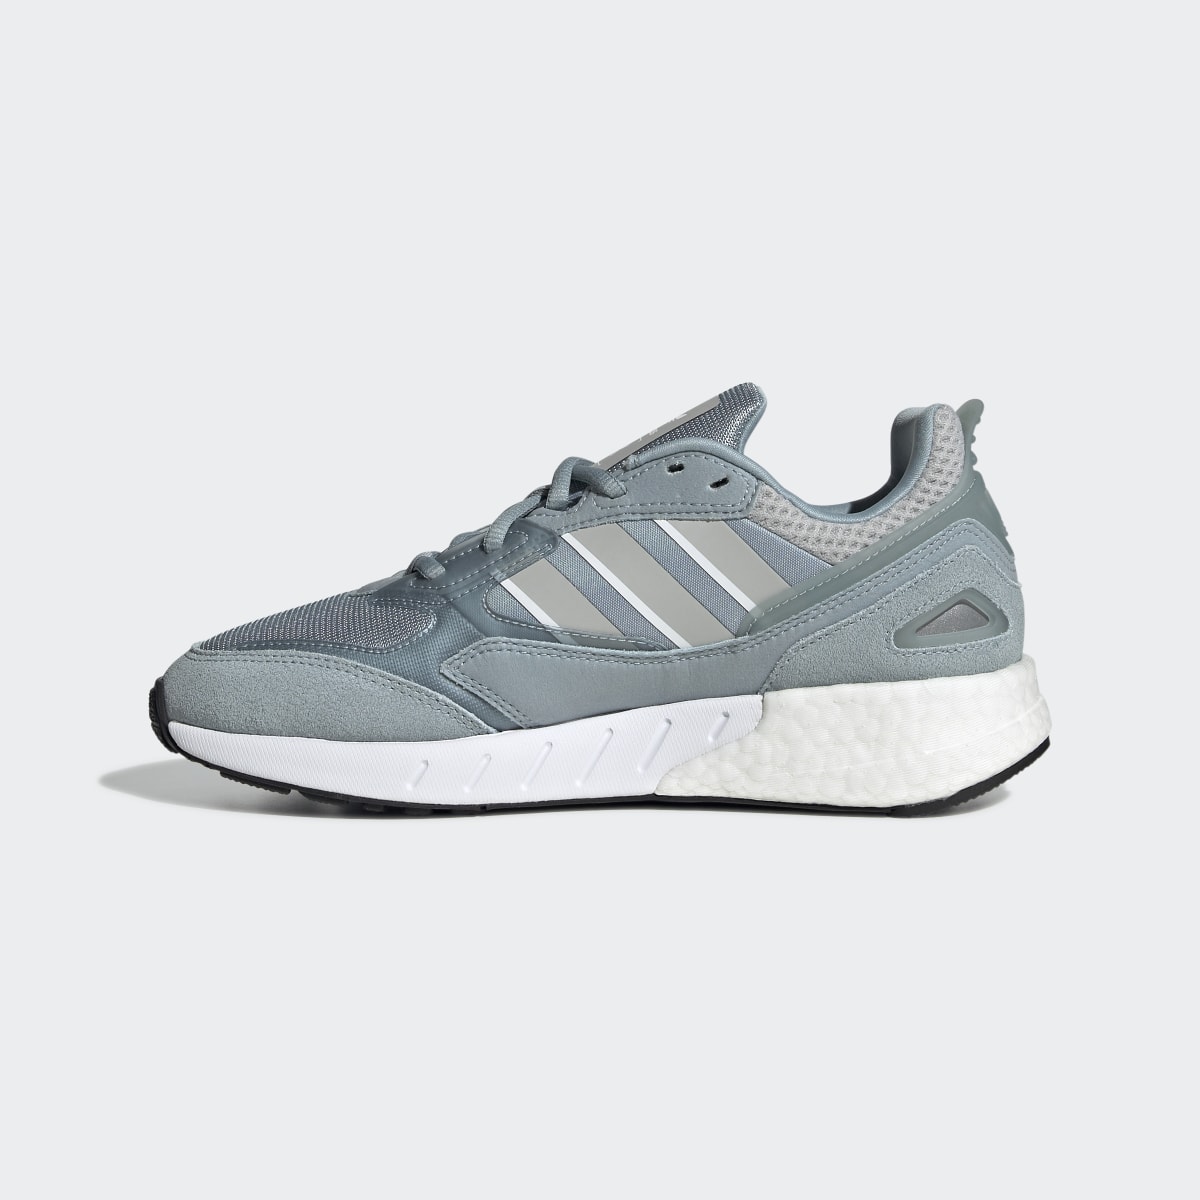 Adidas ZX 1K BOOST 2.0 Shoes. 7